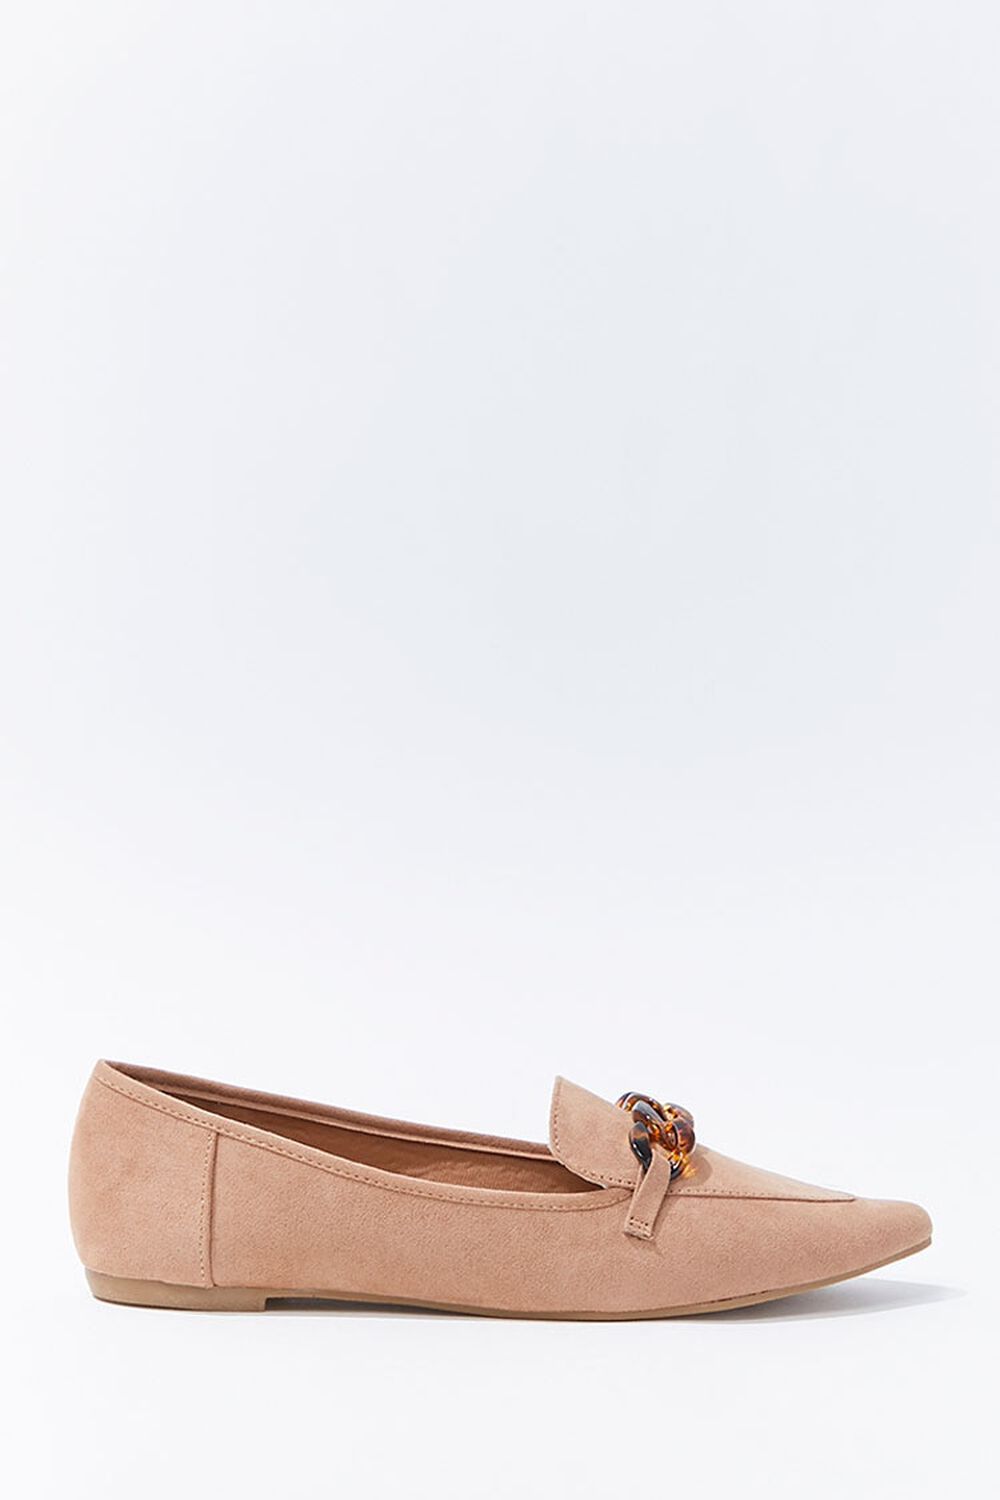 CAMEL Faux Suede Curb Chain Loafers, image 1